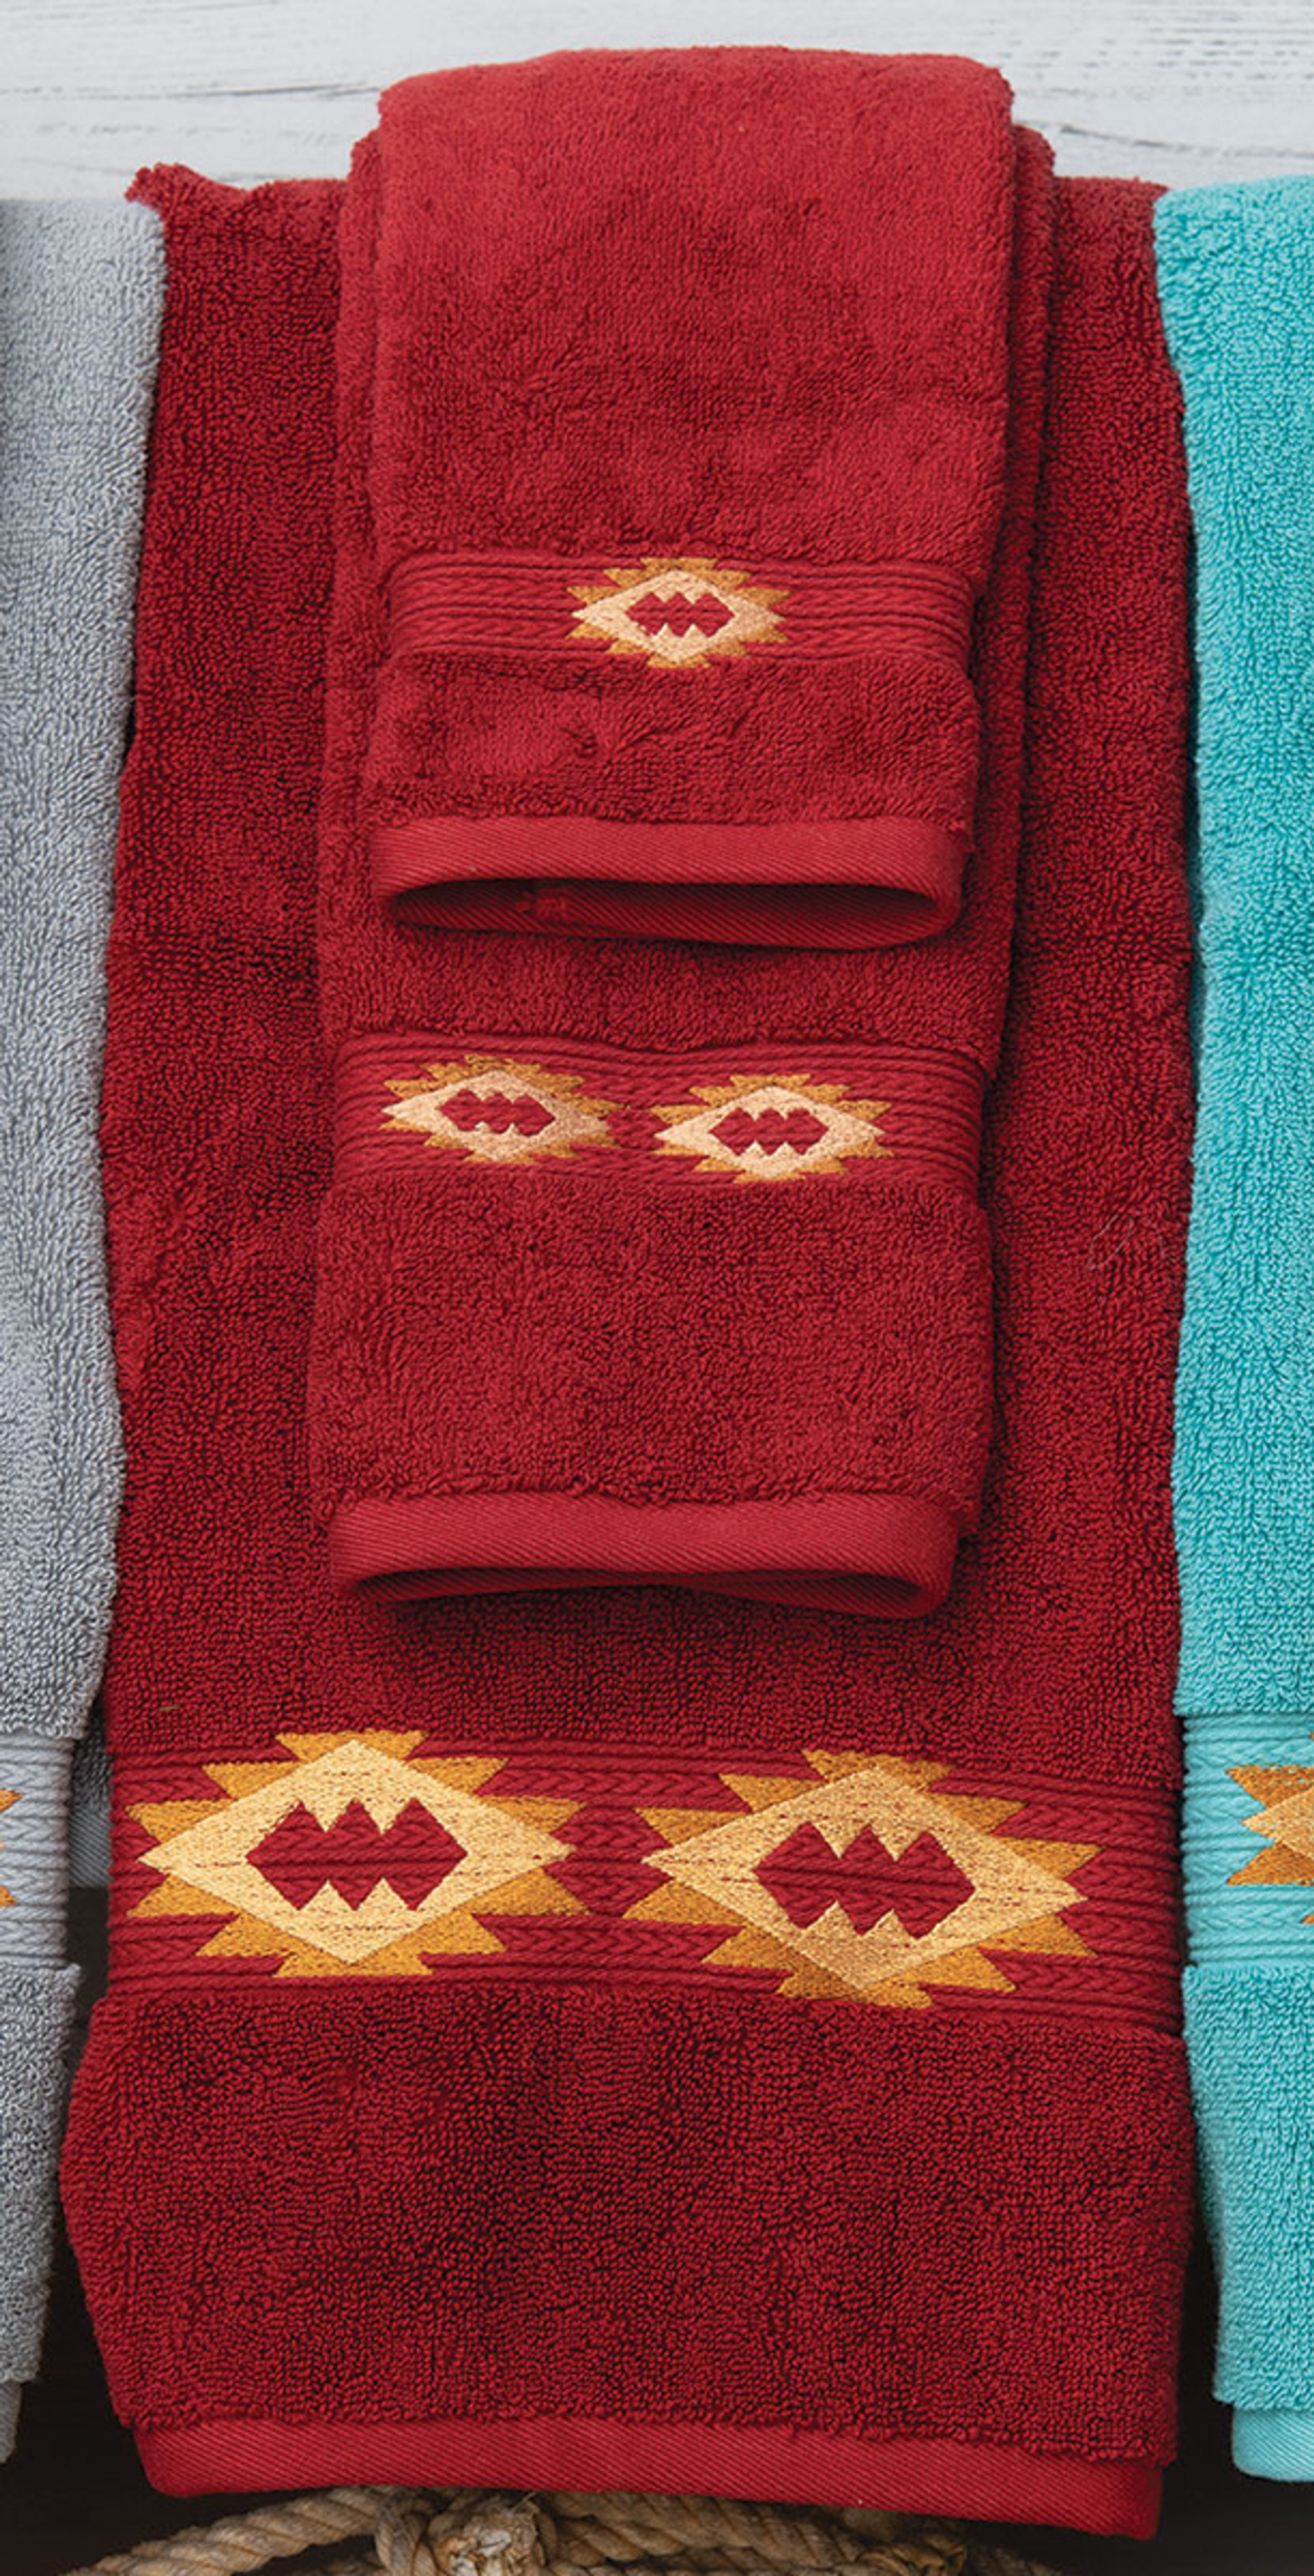 Southwest Diamonds Red Embroidered Towels  71998.1640705284 ?c=1